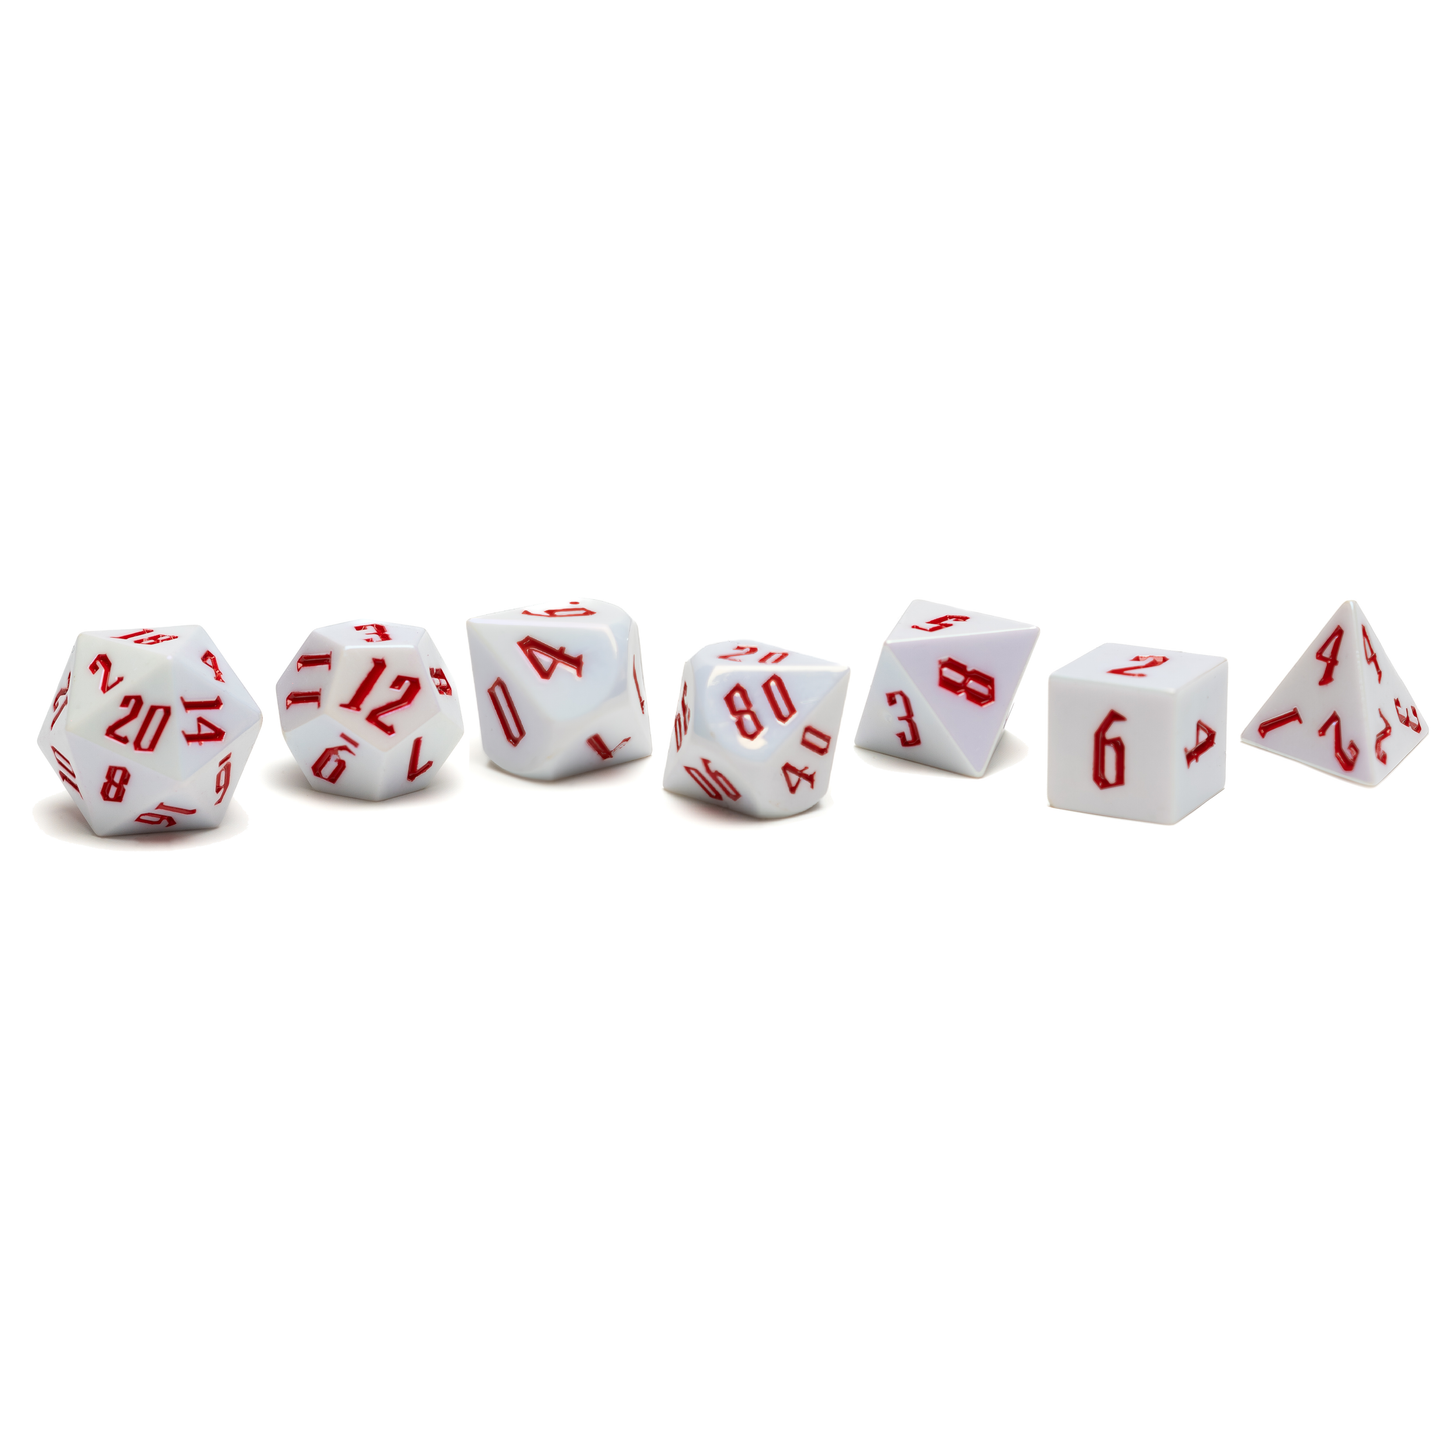 Roll Britannia Royal Guard Sharp Edged Electroplating Dungeons and Dragons Dice Set with Red and White Aesthetic